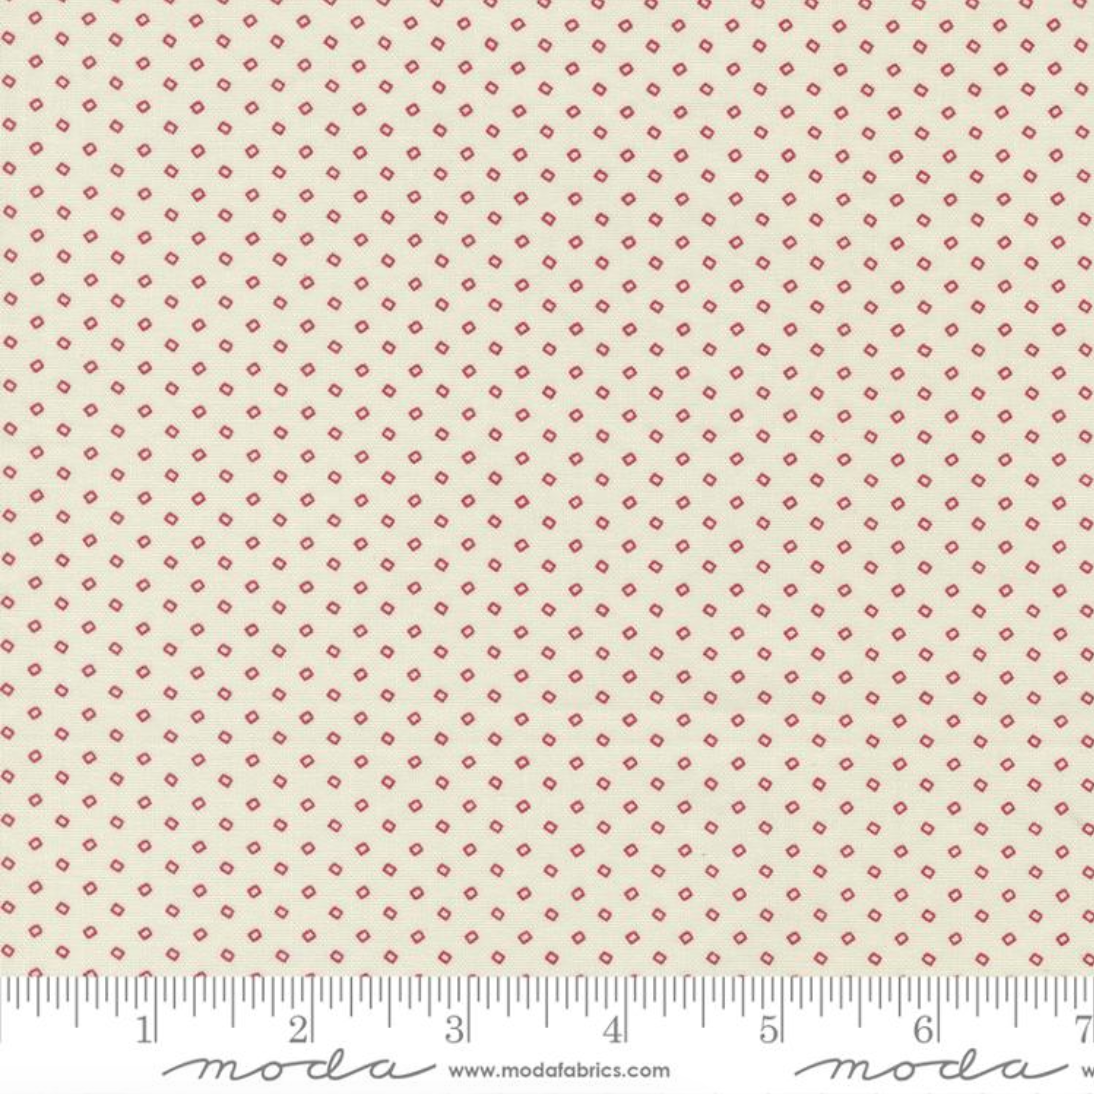 Sugarberry ~ Sugar Crystals Porcelain Cherry 3027 11